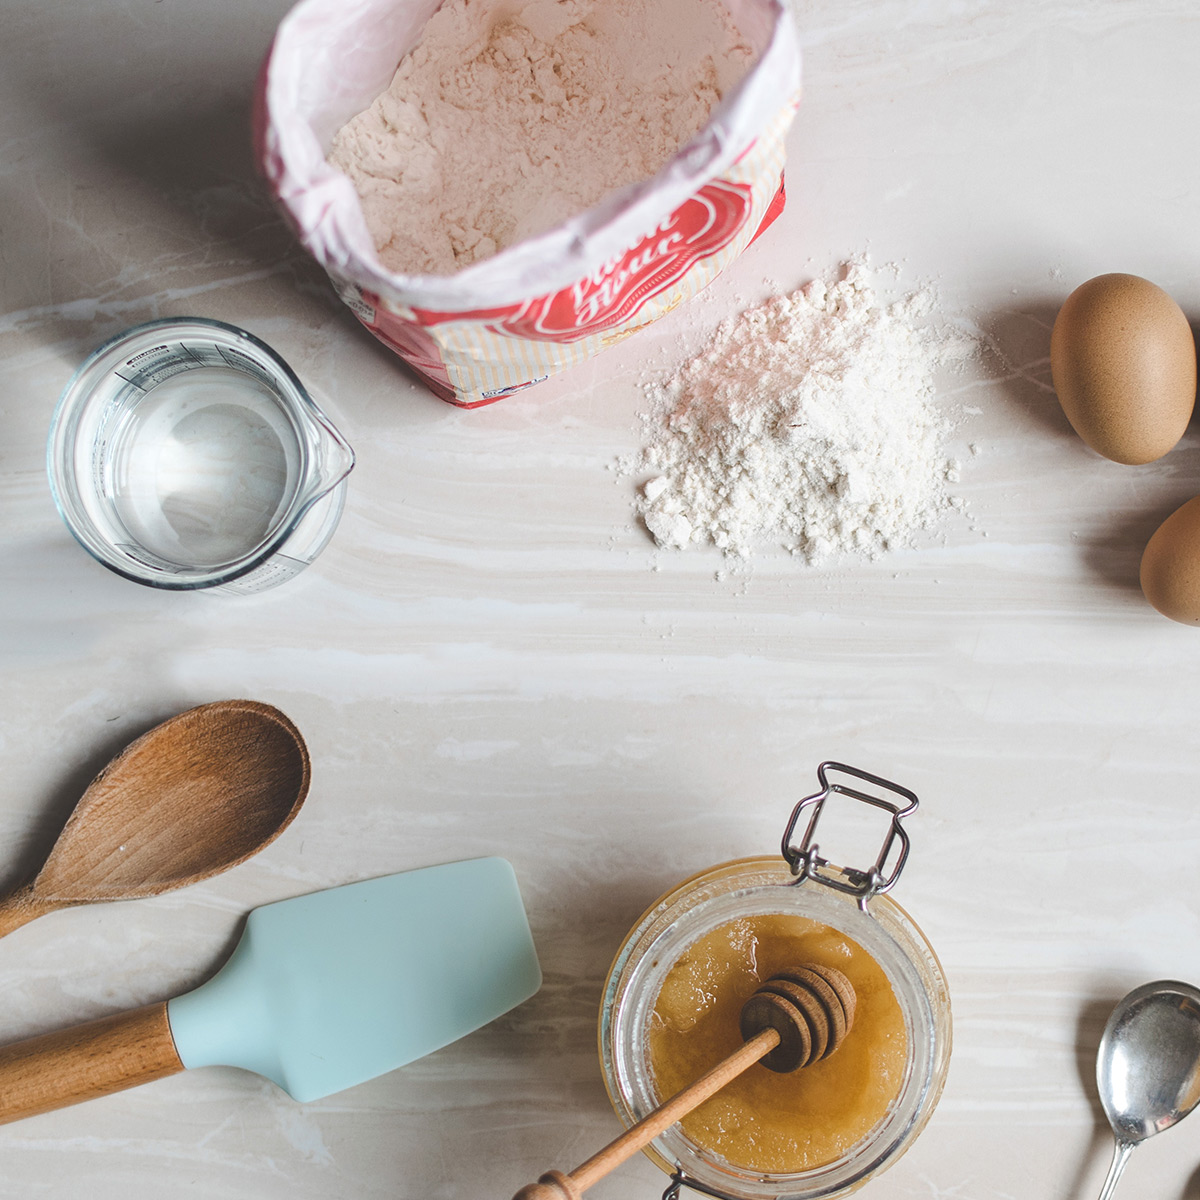 Baking supplies and ingredients